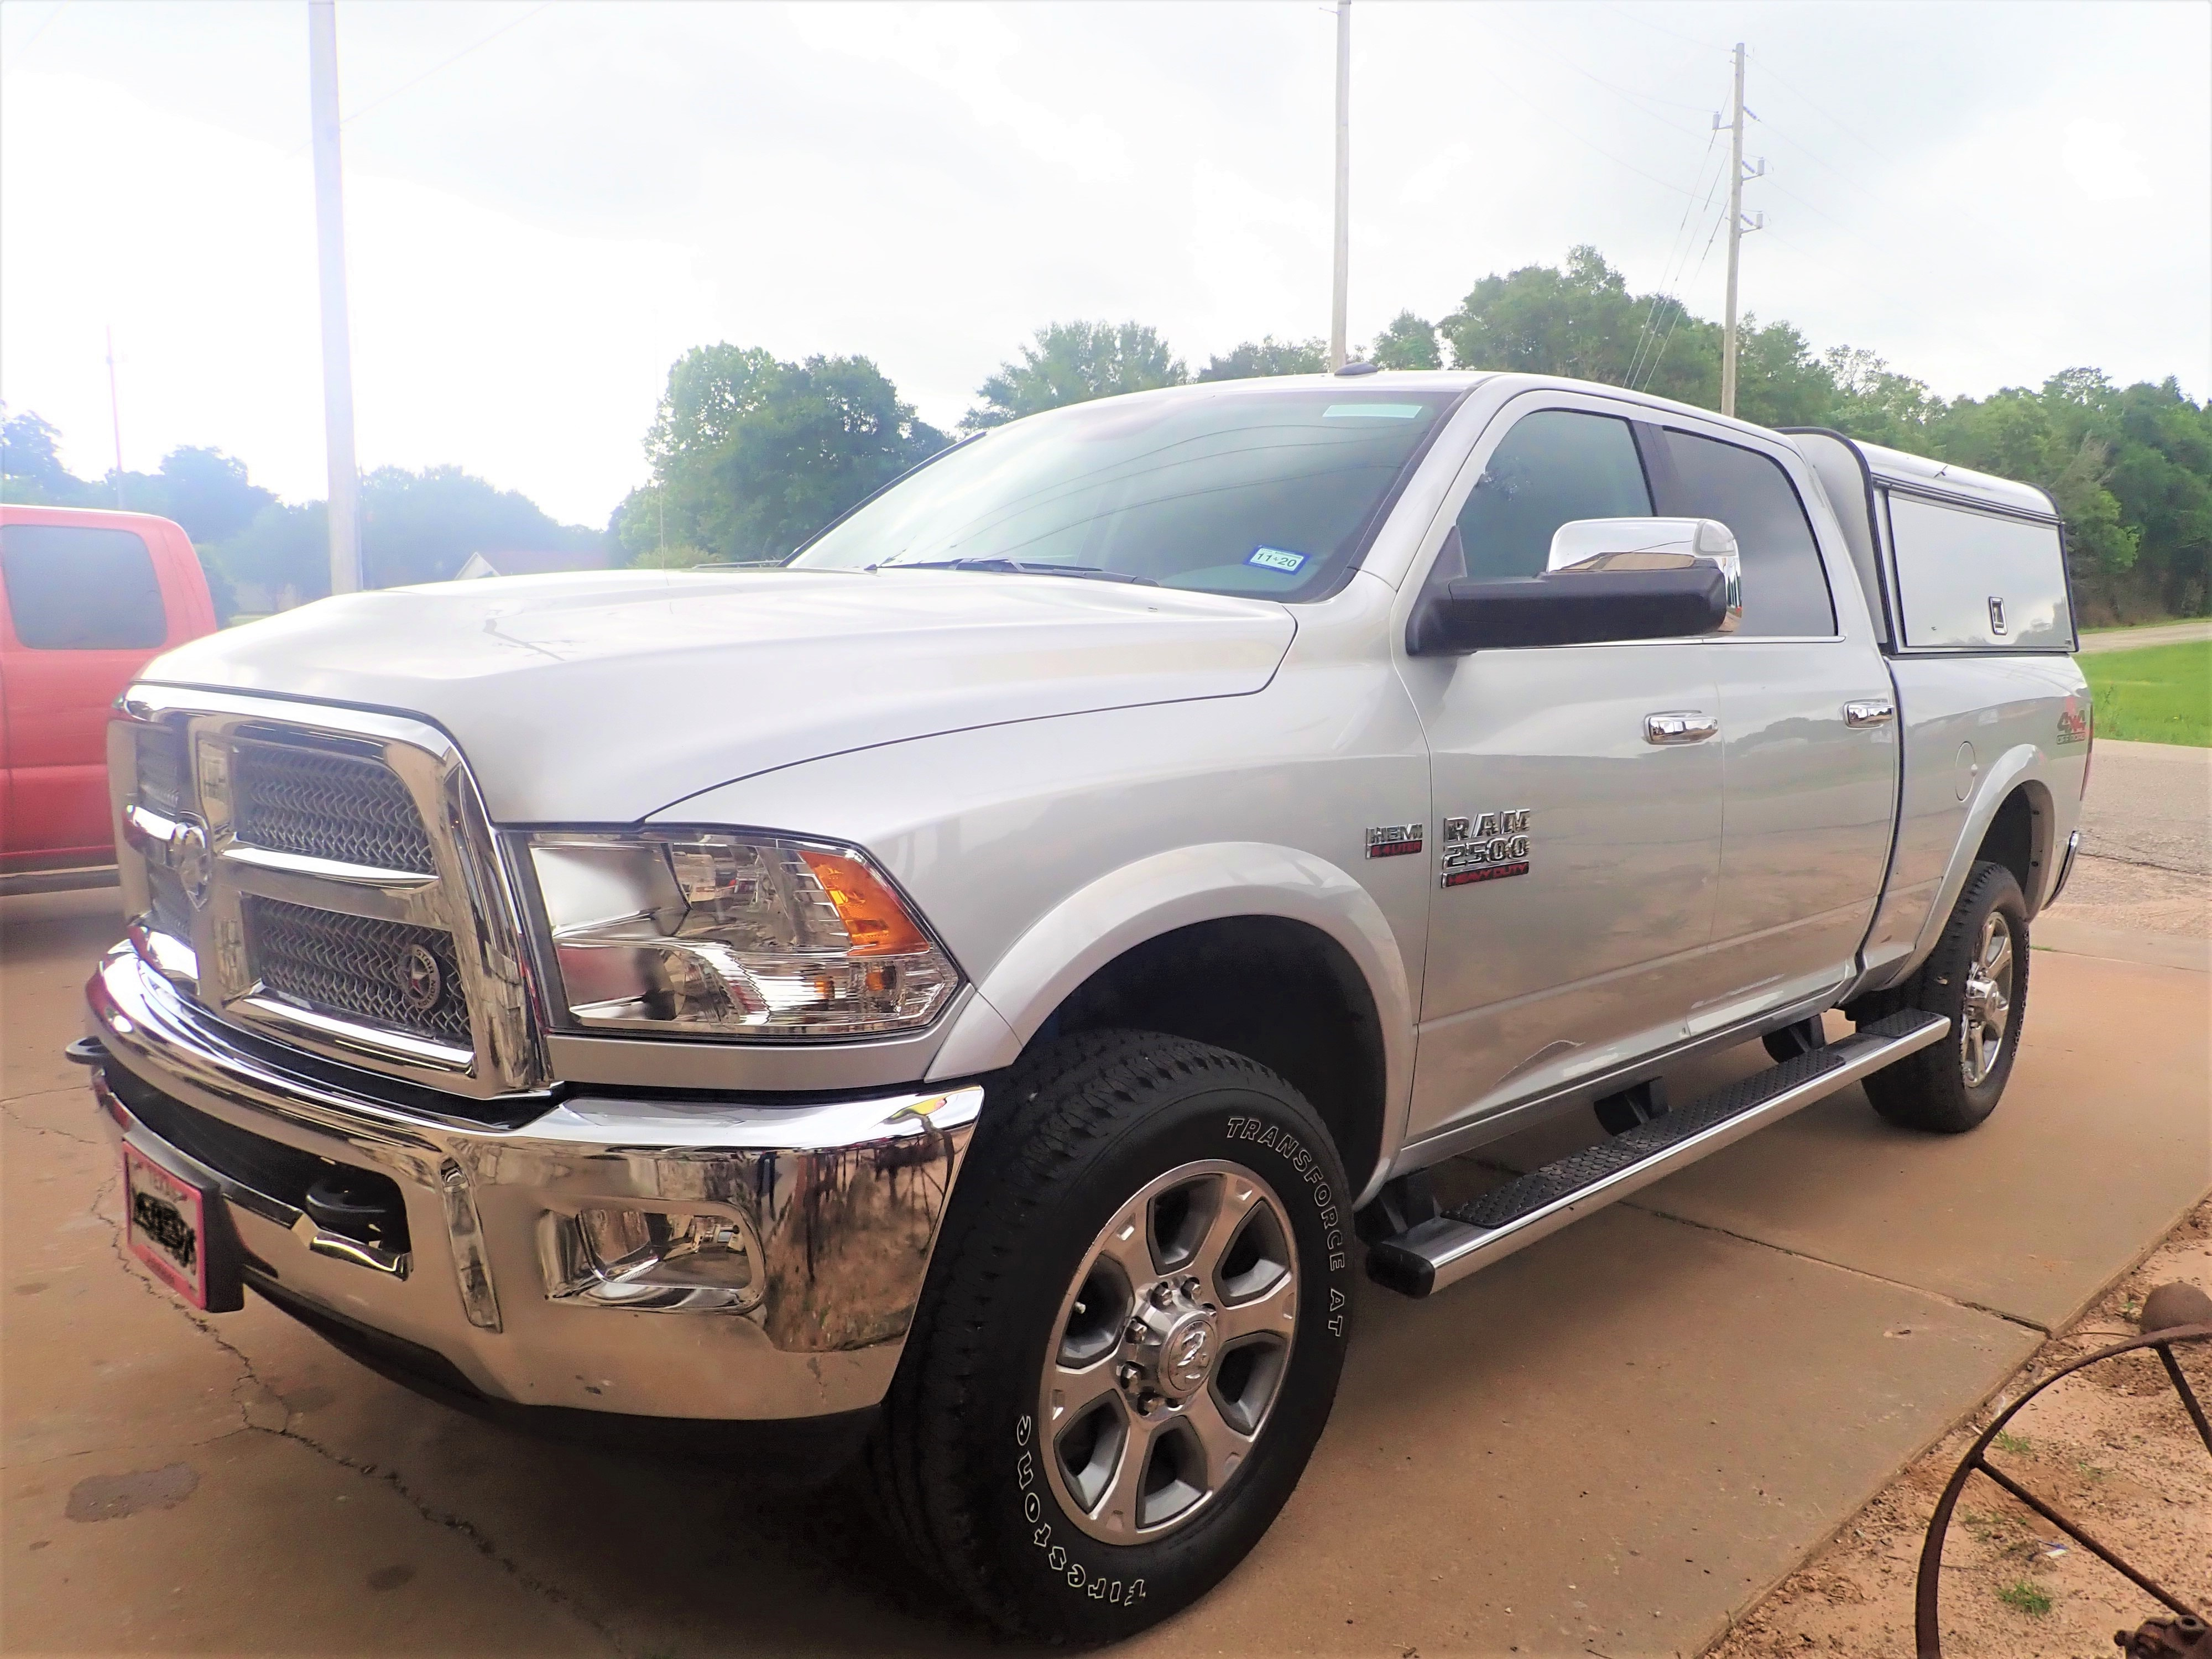 2018 Dodge Ram
Completed Repairs